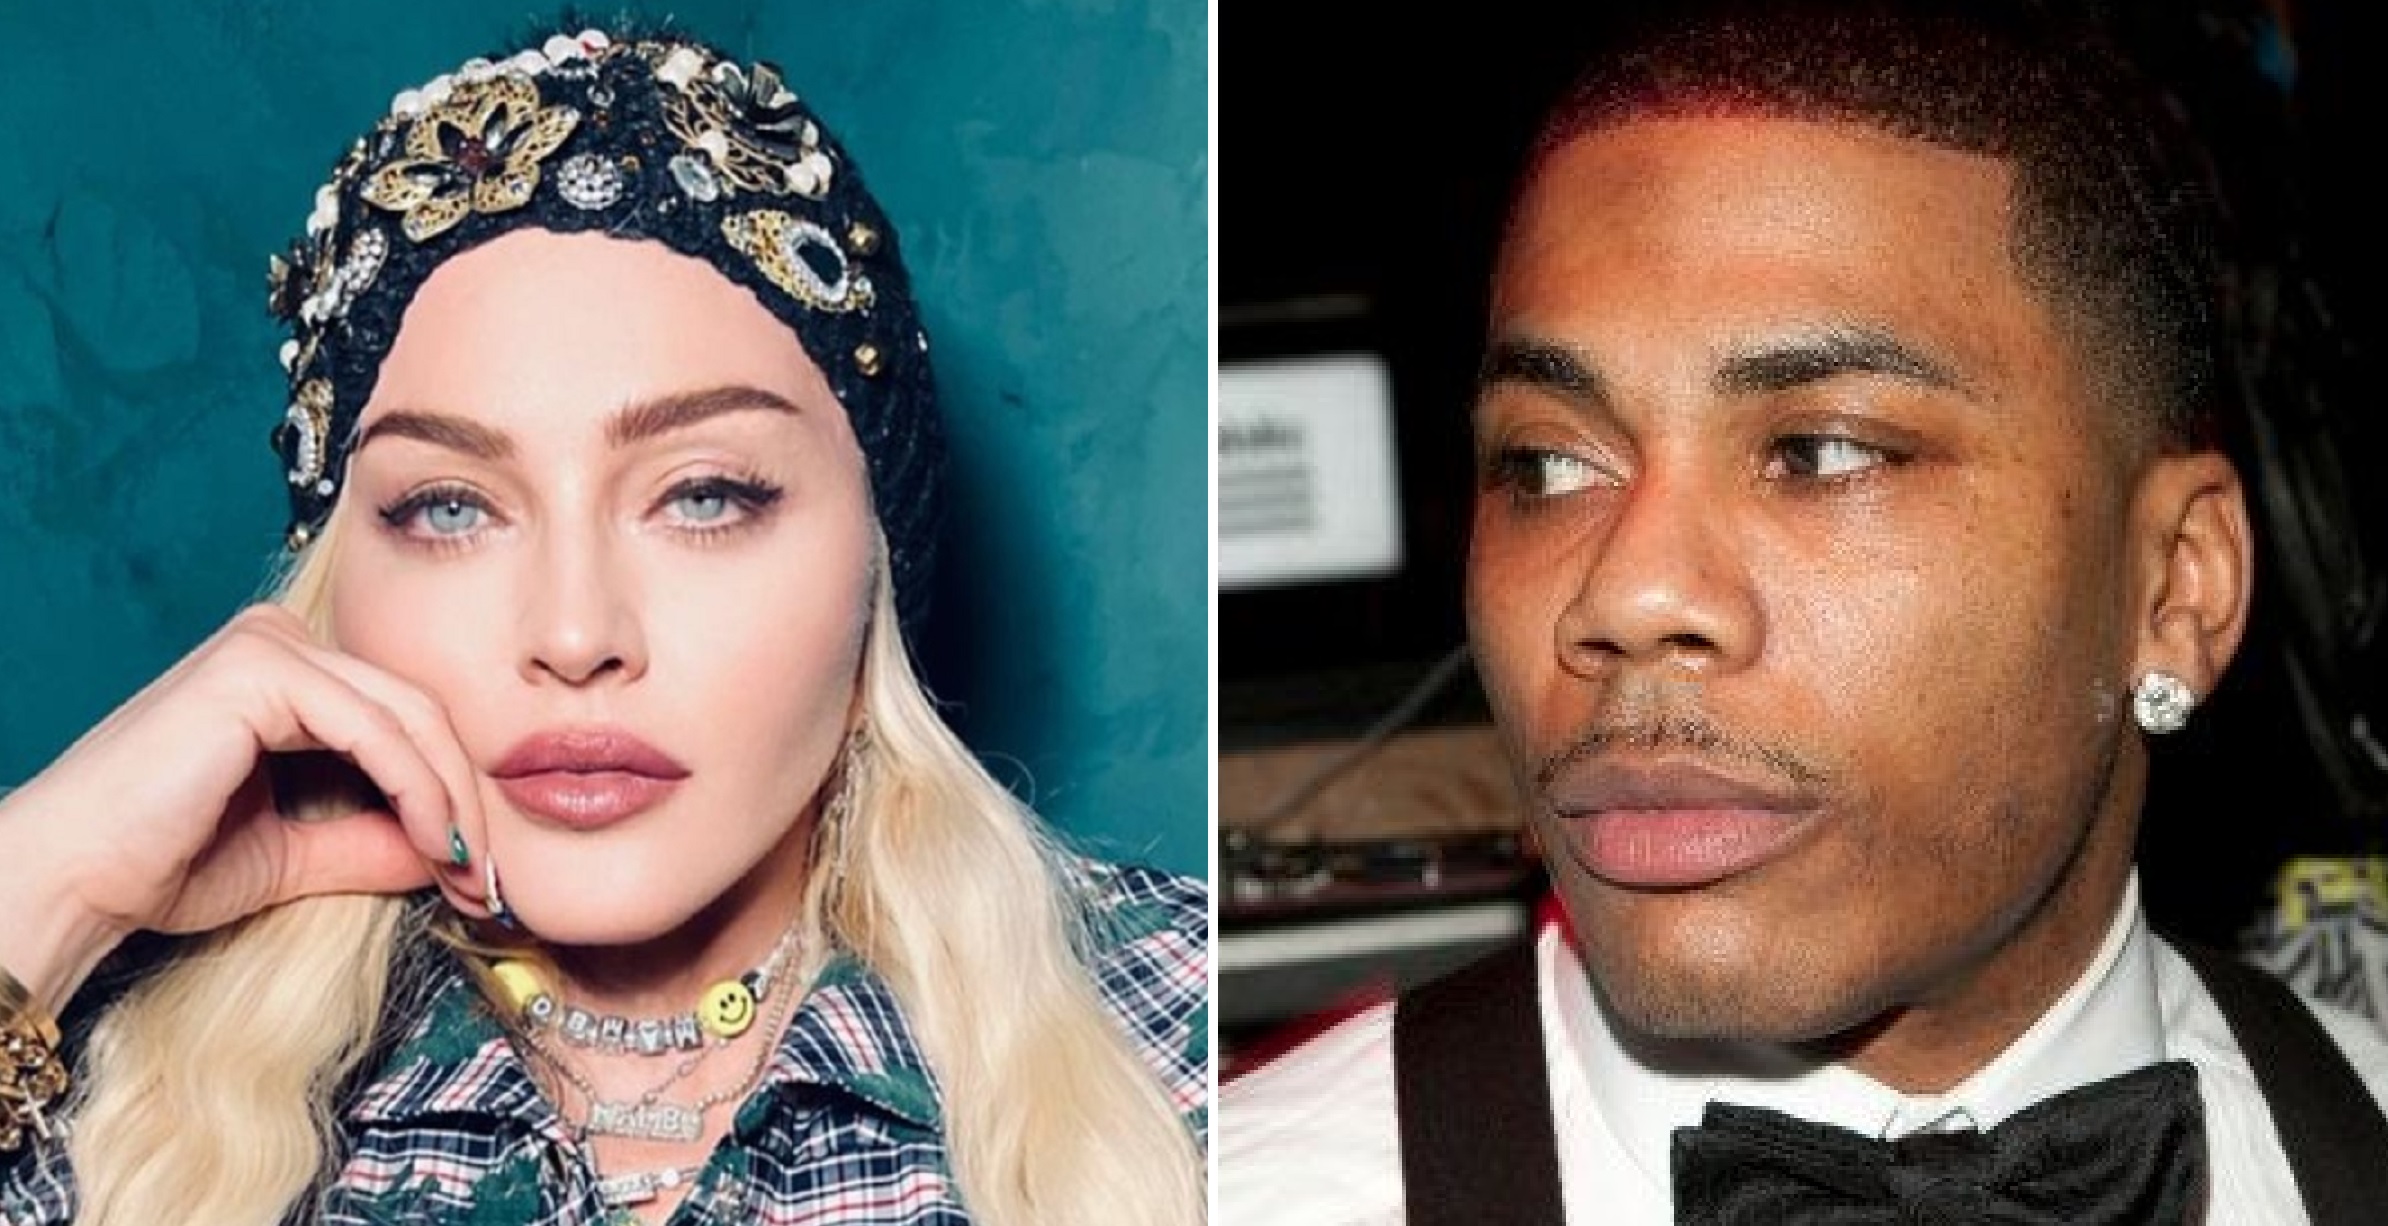 Nelly Suggests Madonna Should ‘Cover Up’ After She Posts Racy Pics On Instagram